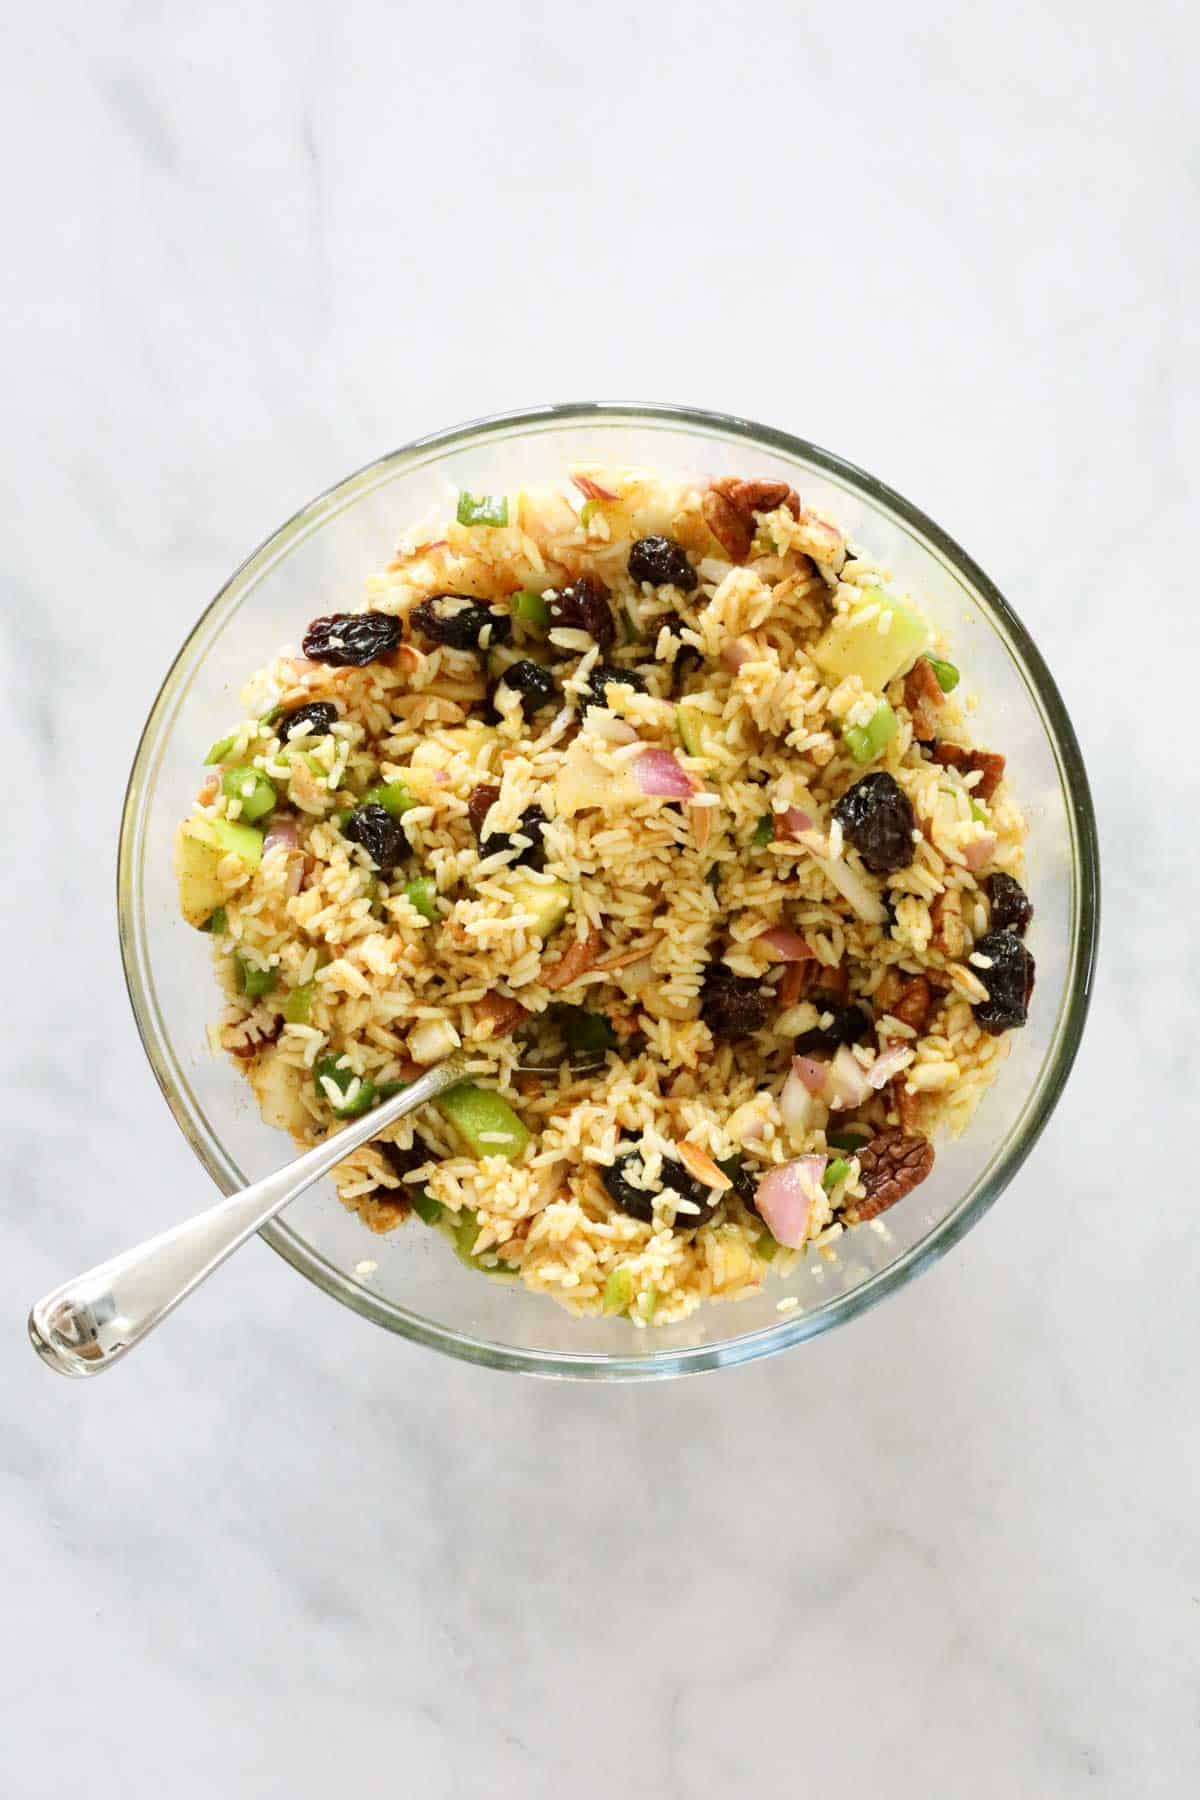 A large glass bowl filled with rice, spring onions, raisins, toasted nuts and mixed together with dressing.